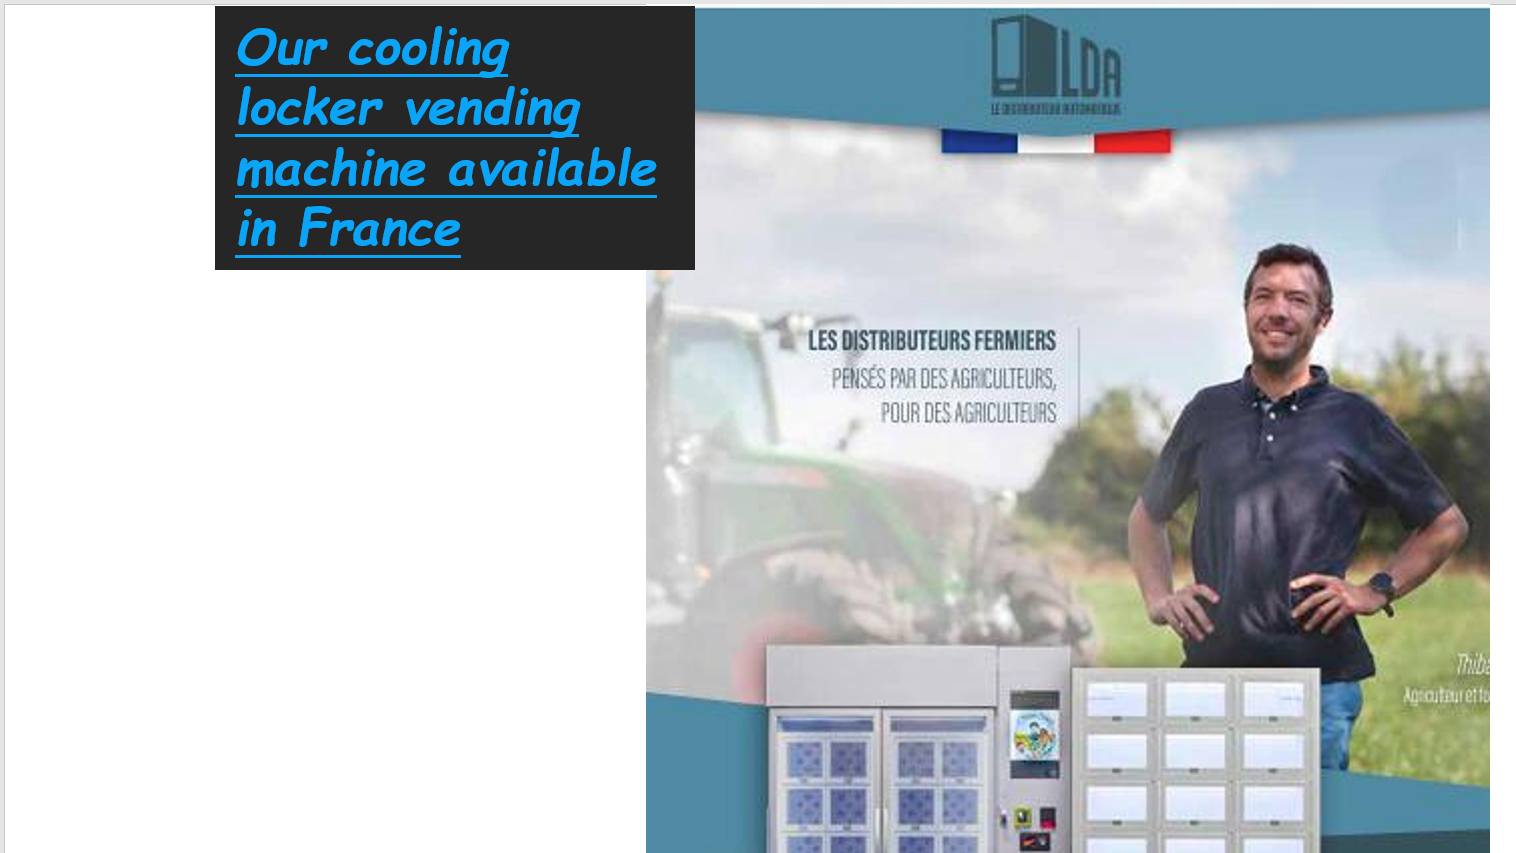 Cooling locker farm product in France